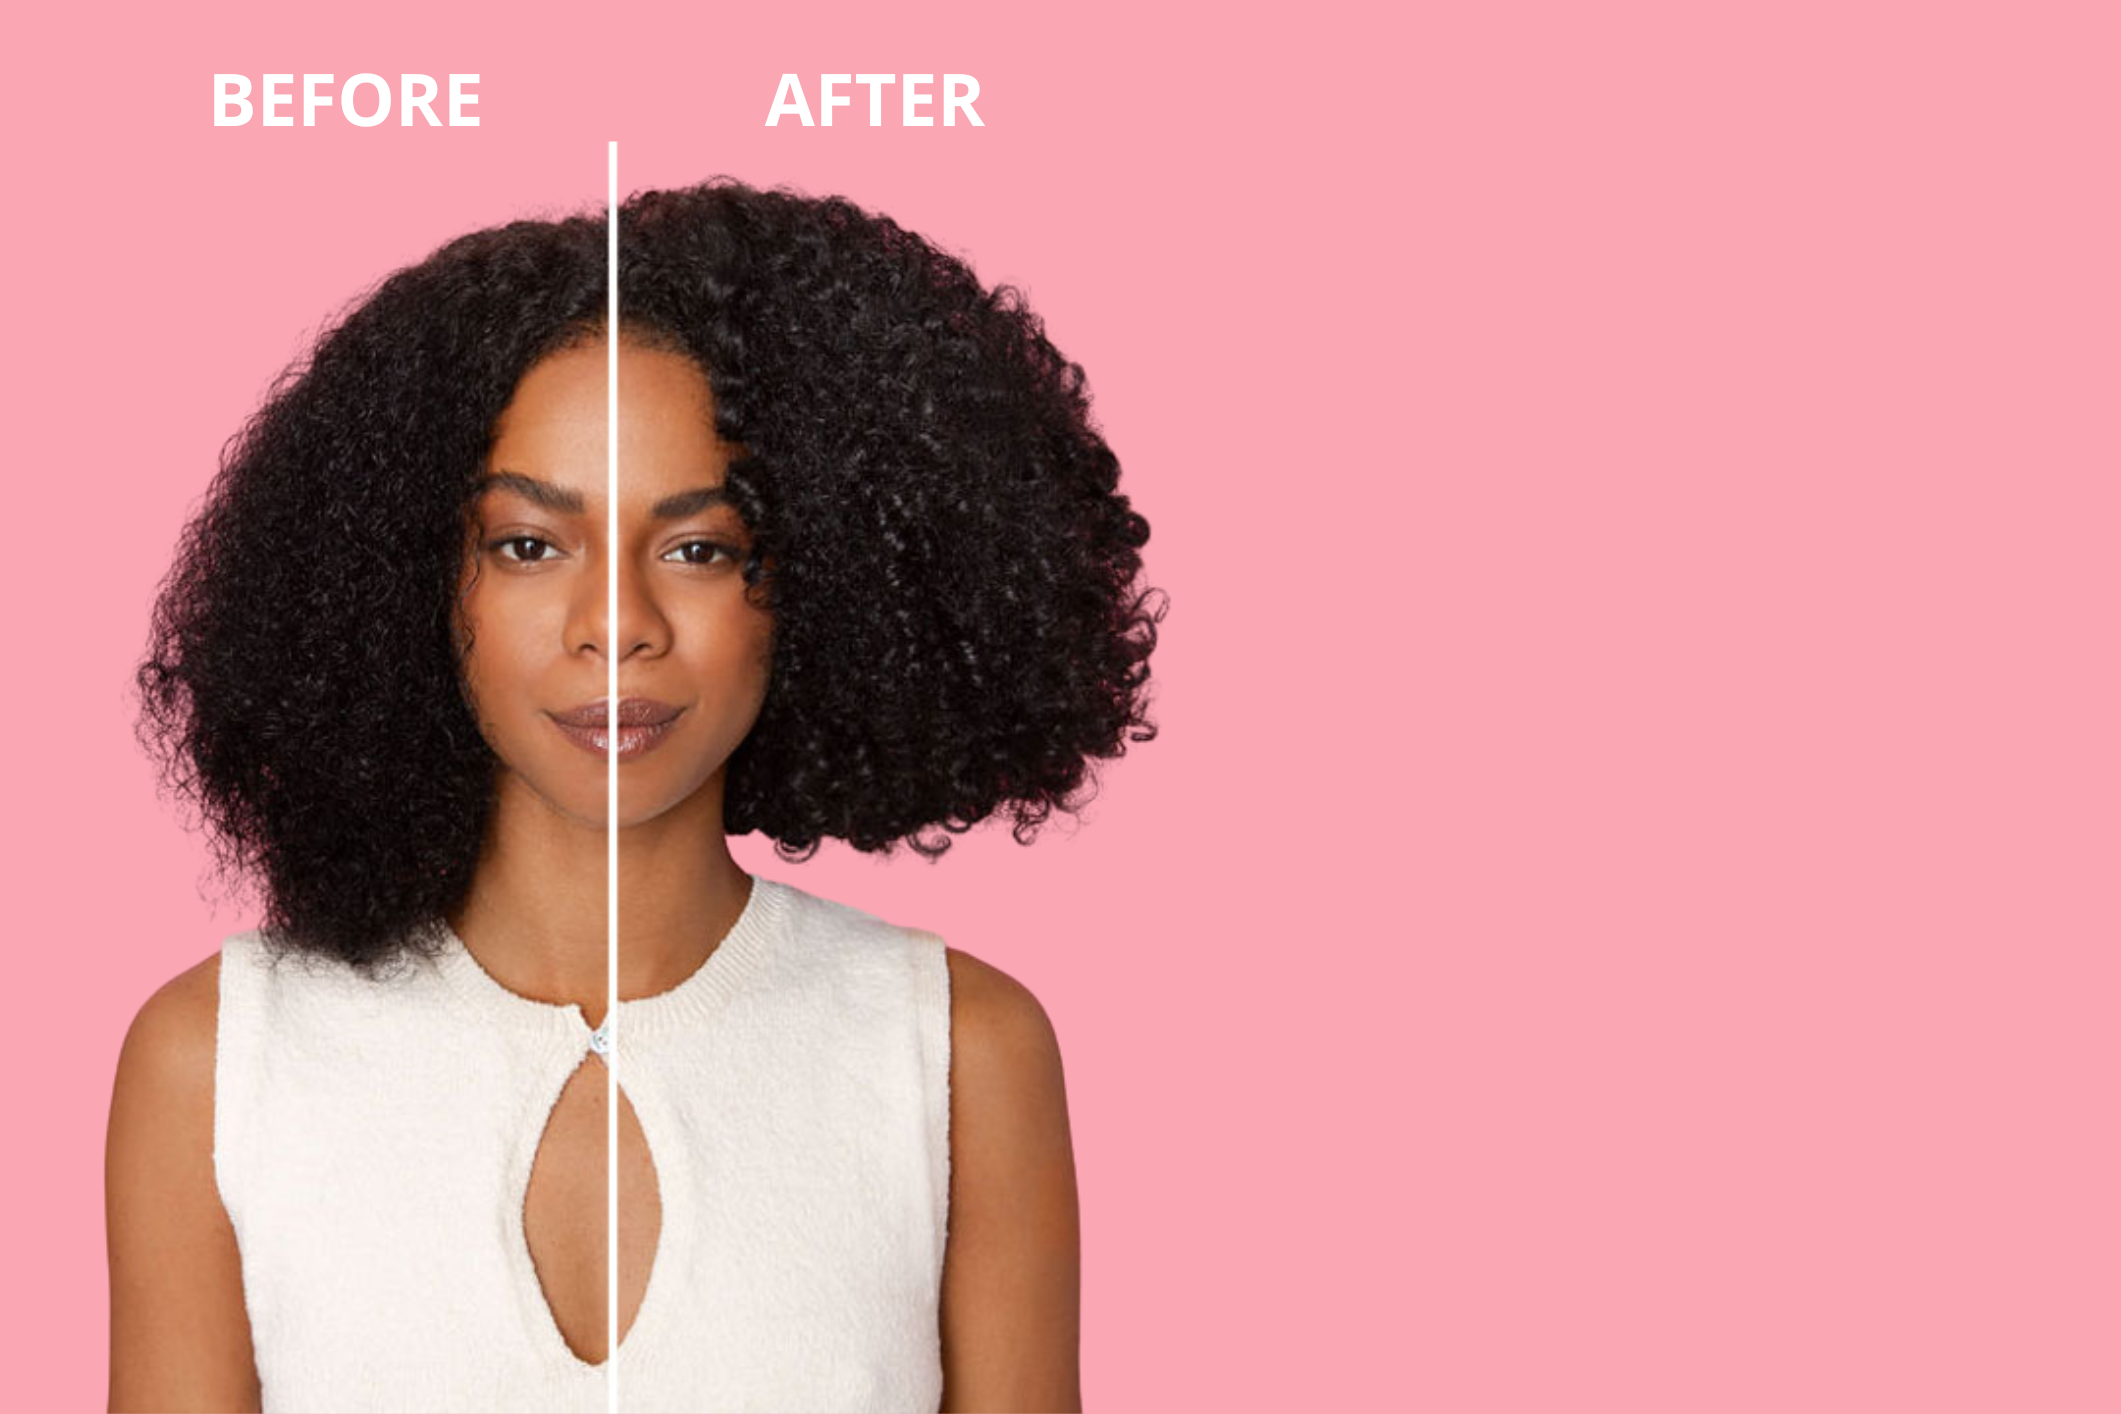 Afro curly hair: how to diffuse them properly